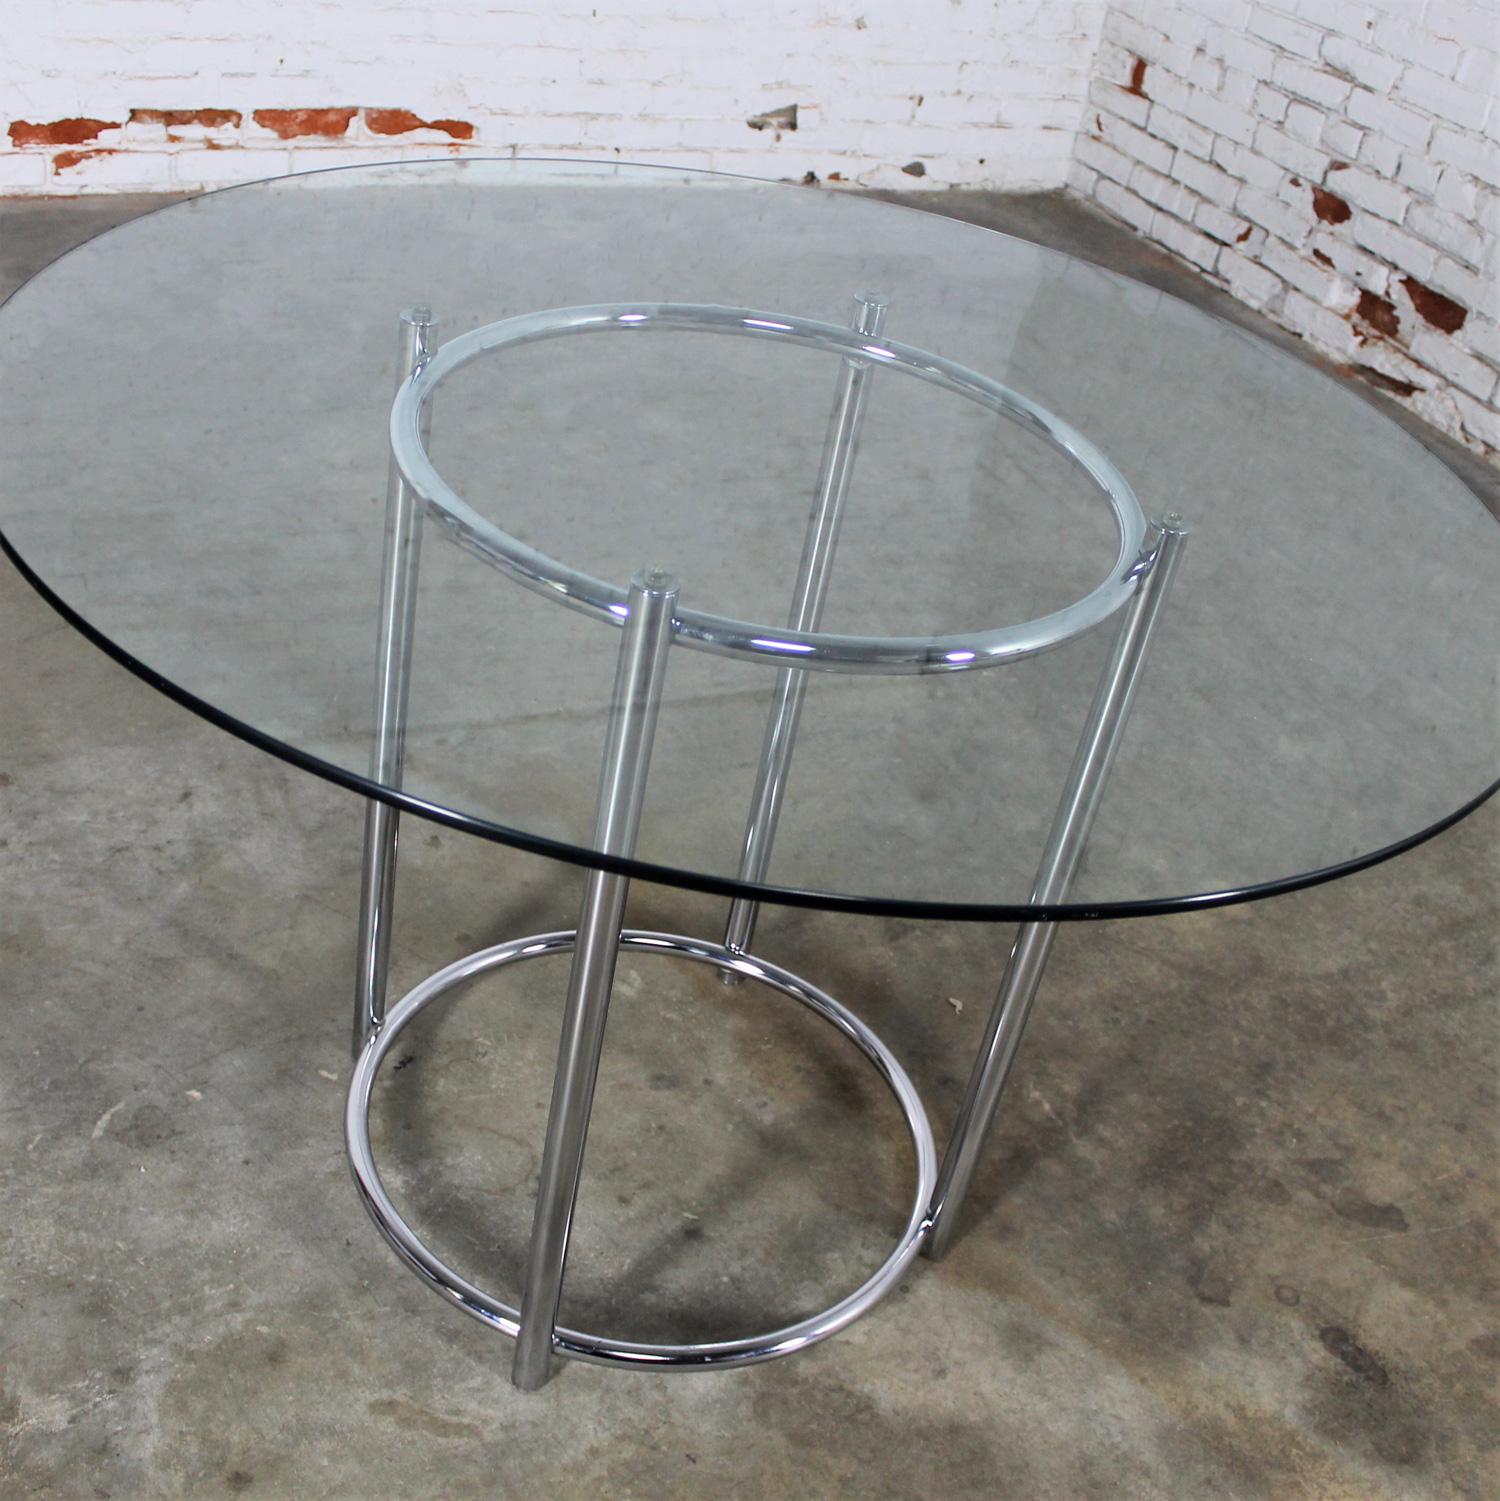 Handsome 1980’s Modern Daystrom dinette or dining table comprised of 1 inch chrome tube frame or base, 1 inch diameter rings, and a ¼ inch glass top. Beautiful condition, keeping in mind that this is vintage and not new so will have signs of use and